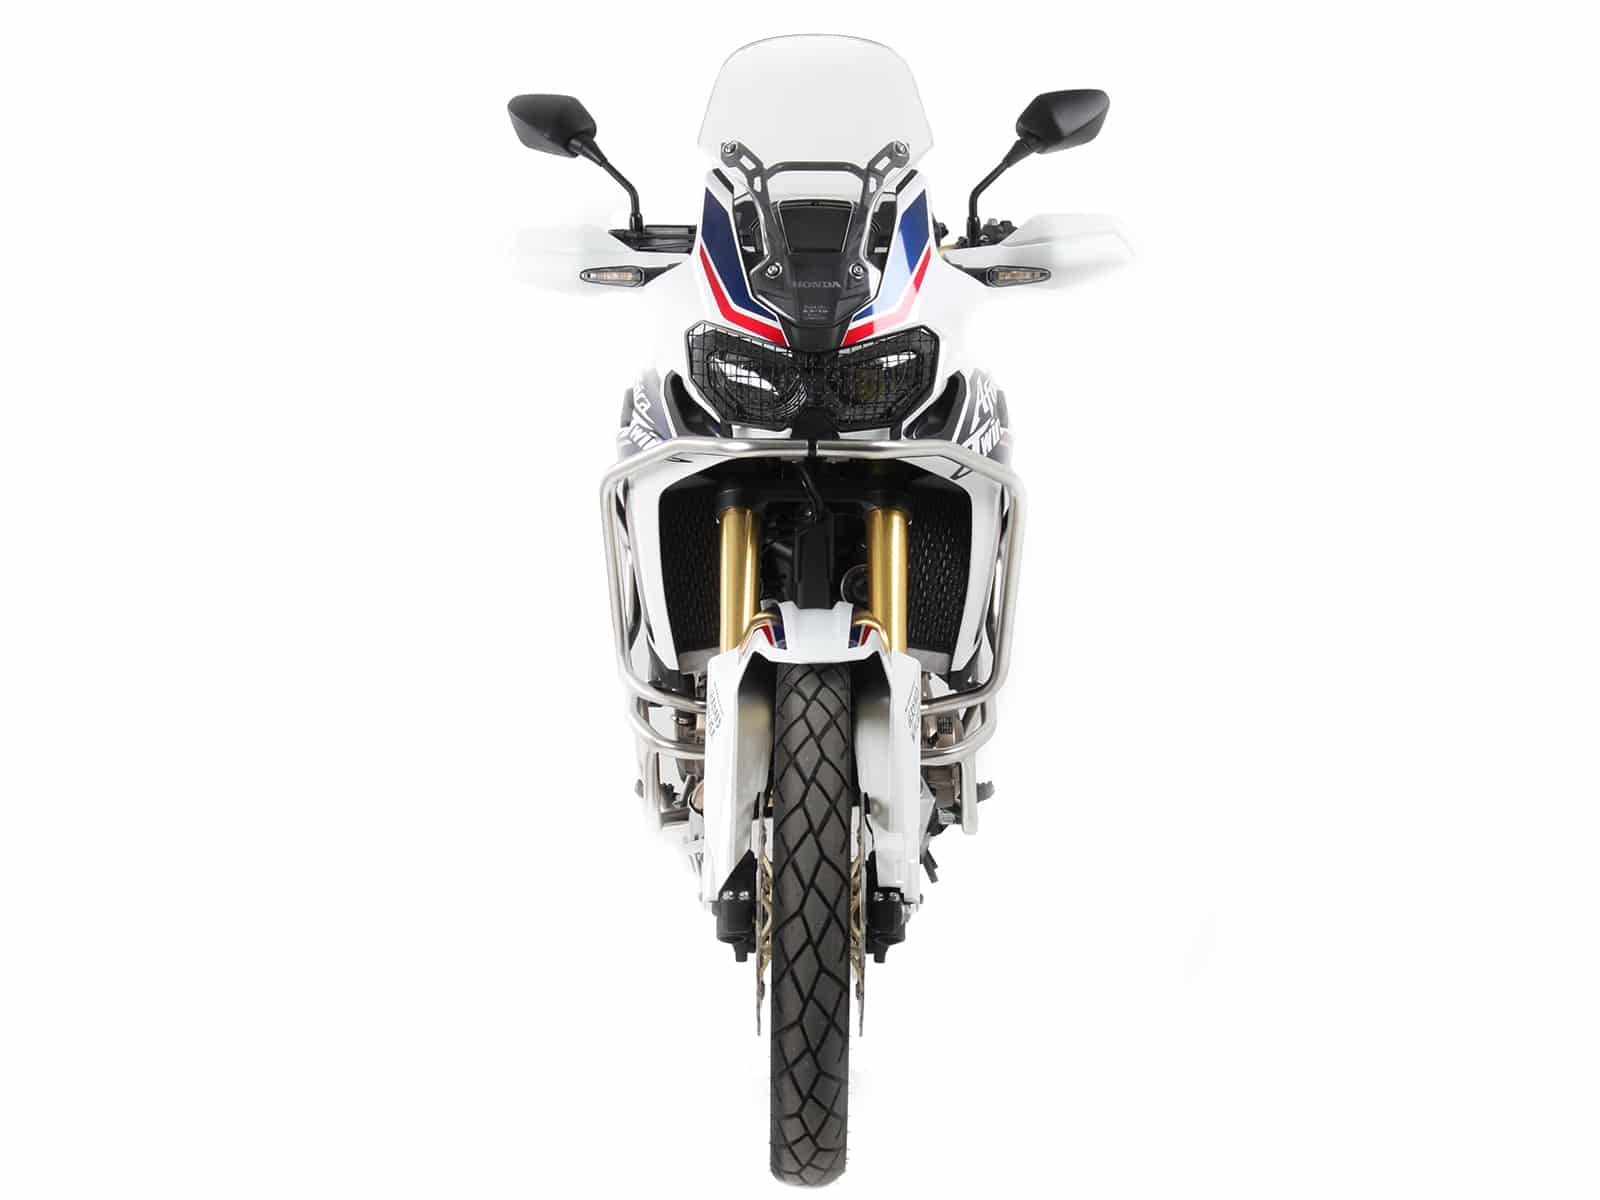 Tankguard stainless steel for Honda CRF1000L Africa Twin (2018-2019)